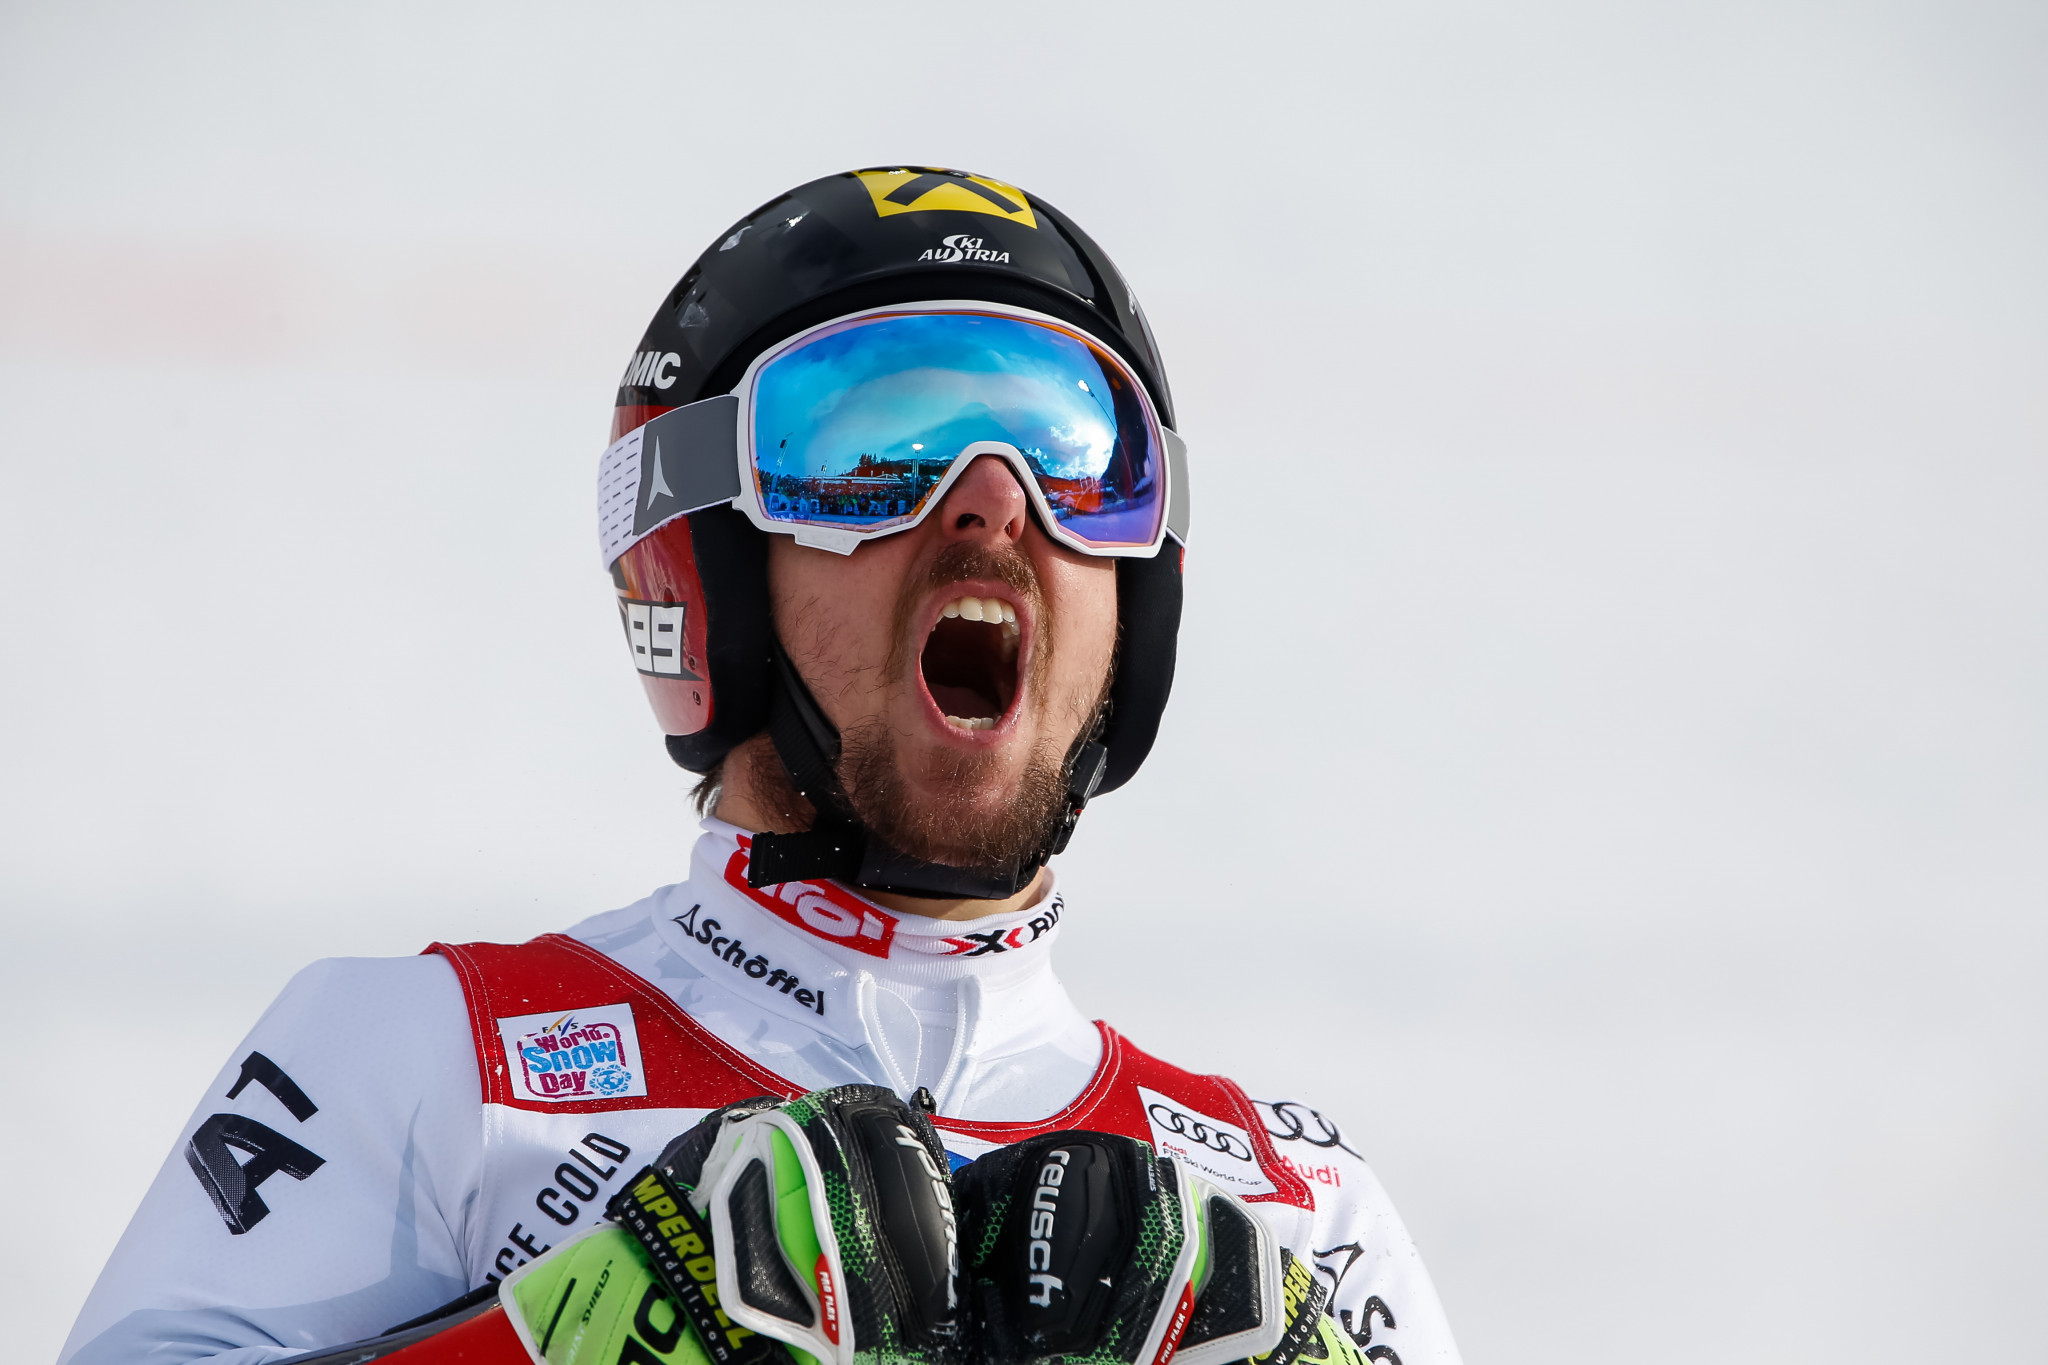 Hirscher cruises to record-breaking giant slalom success at FIS Alpine Skiing World Cup in Alta Badia